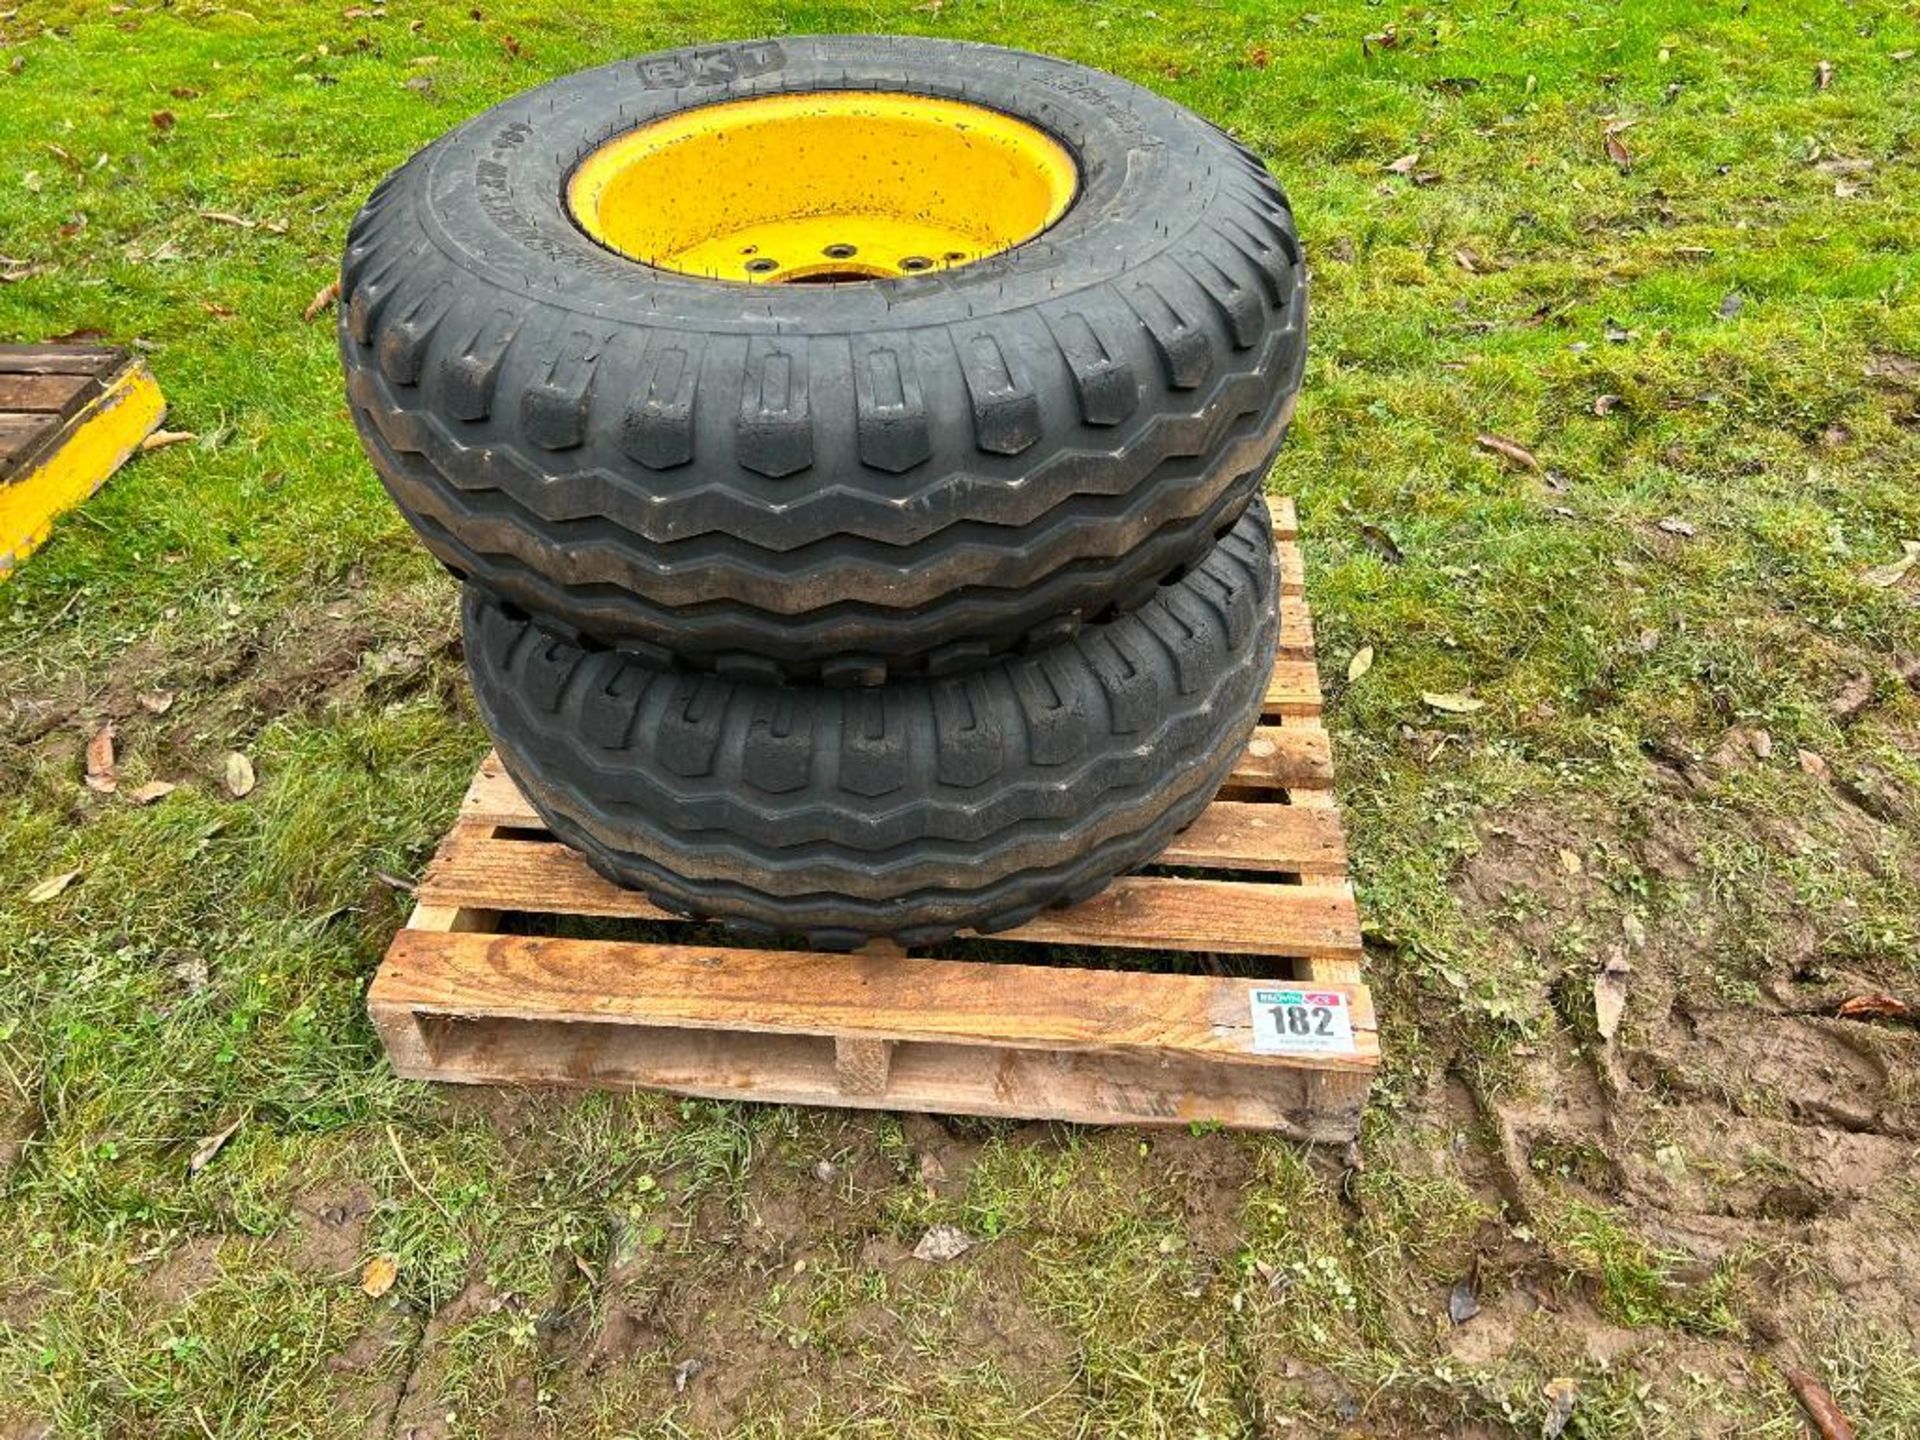 Pair of BKT 11.5/80-15.3 tyres and wheels to fit JD 6300 - Image 2 of 3